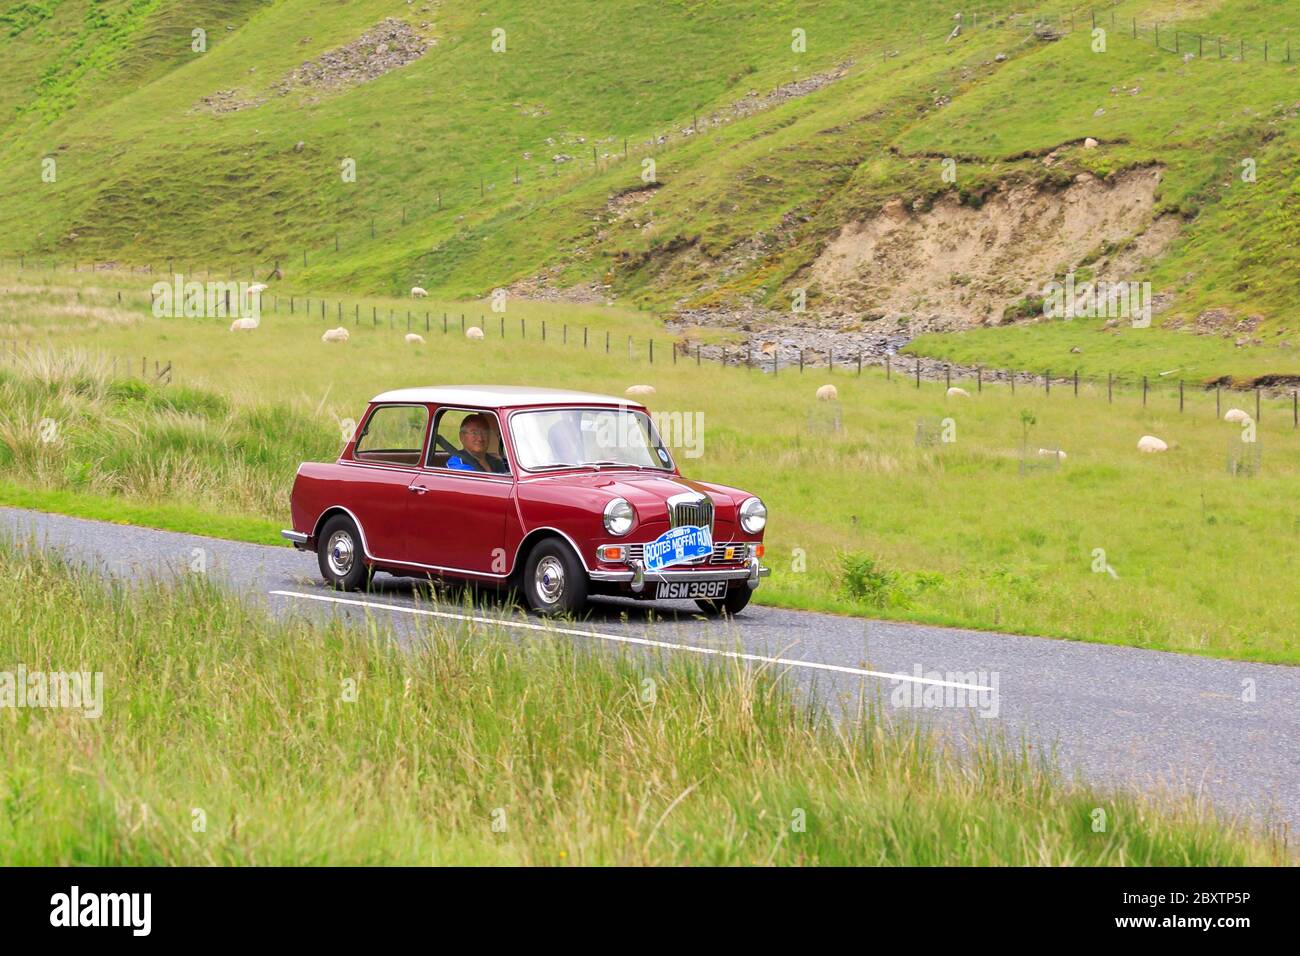 MOFFAT, SCOTLAND - JUNE 29, 2019: 1967 Riley Elf car in a classic car rally en route towards the town of Moffat, Dumfries and Galloway Stock Photo